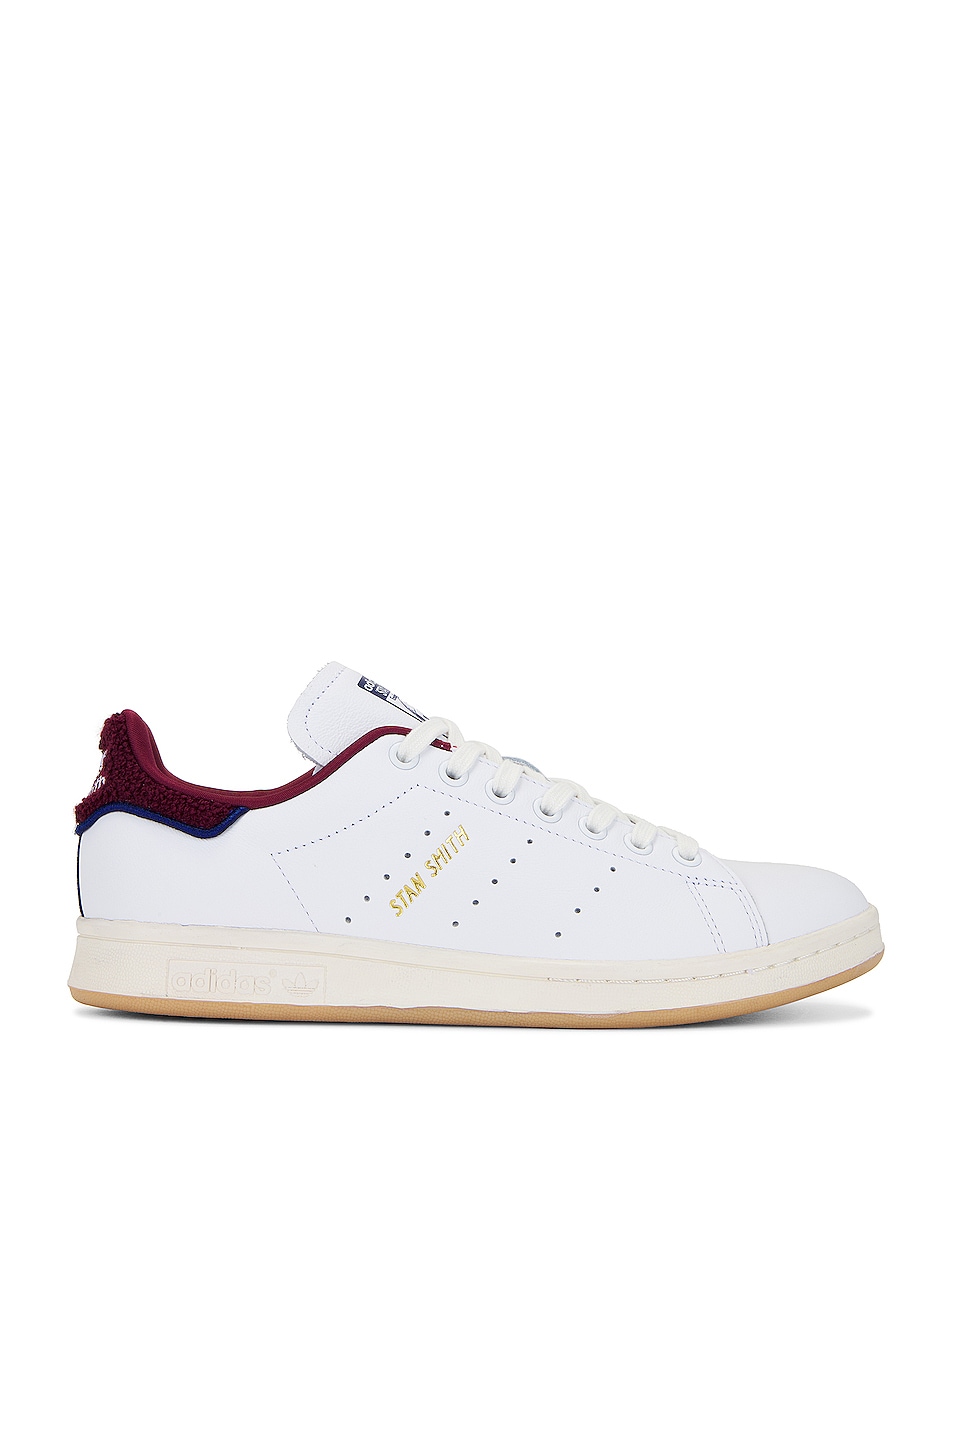 Image 1 of adidas Originals Stan Smith Shoe in White, Off White, & Shadow Red